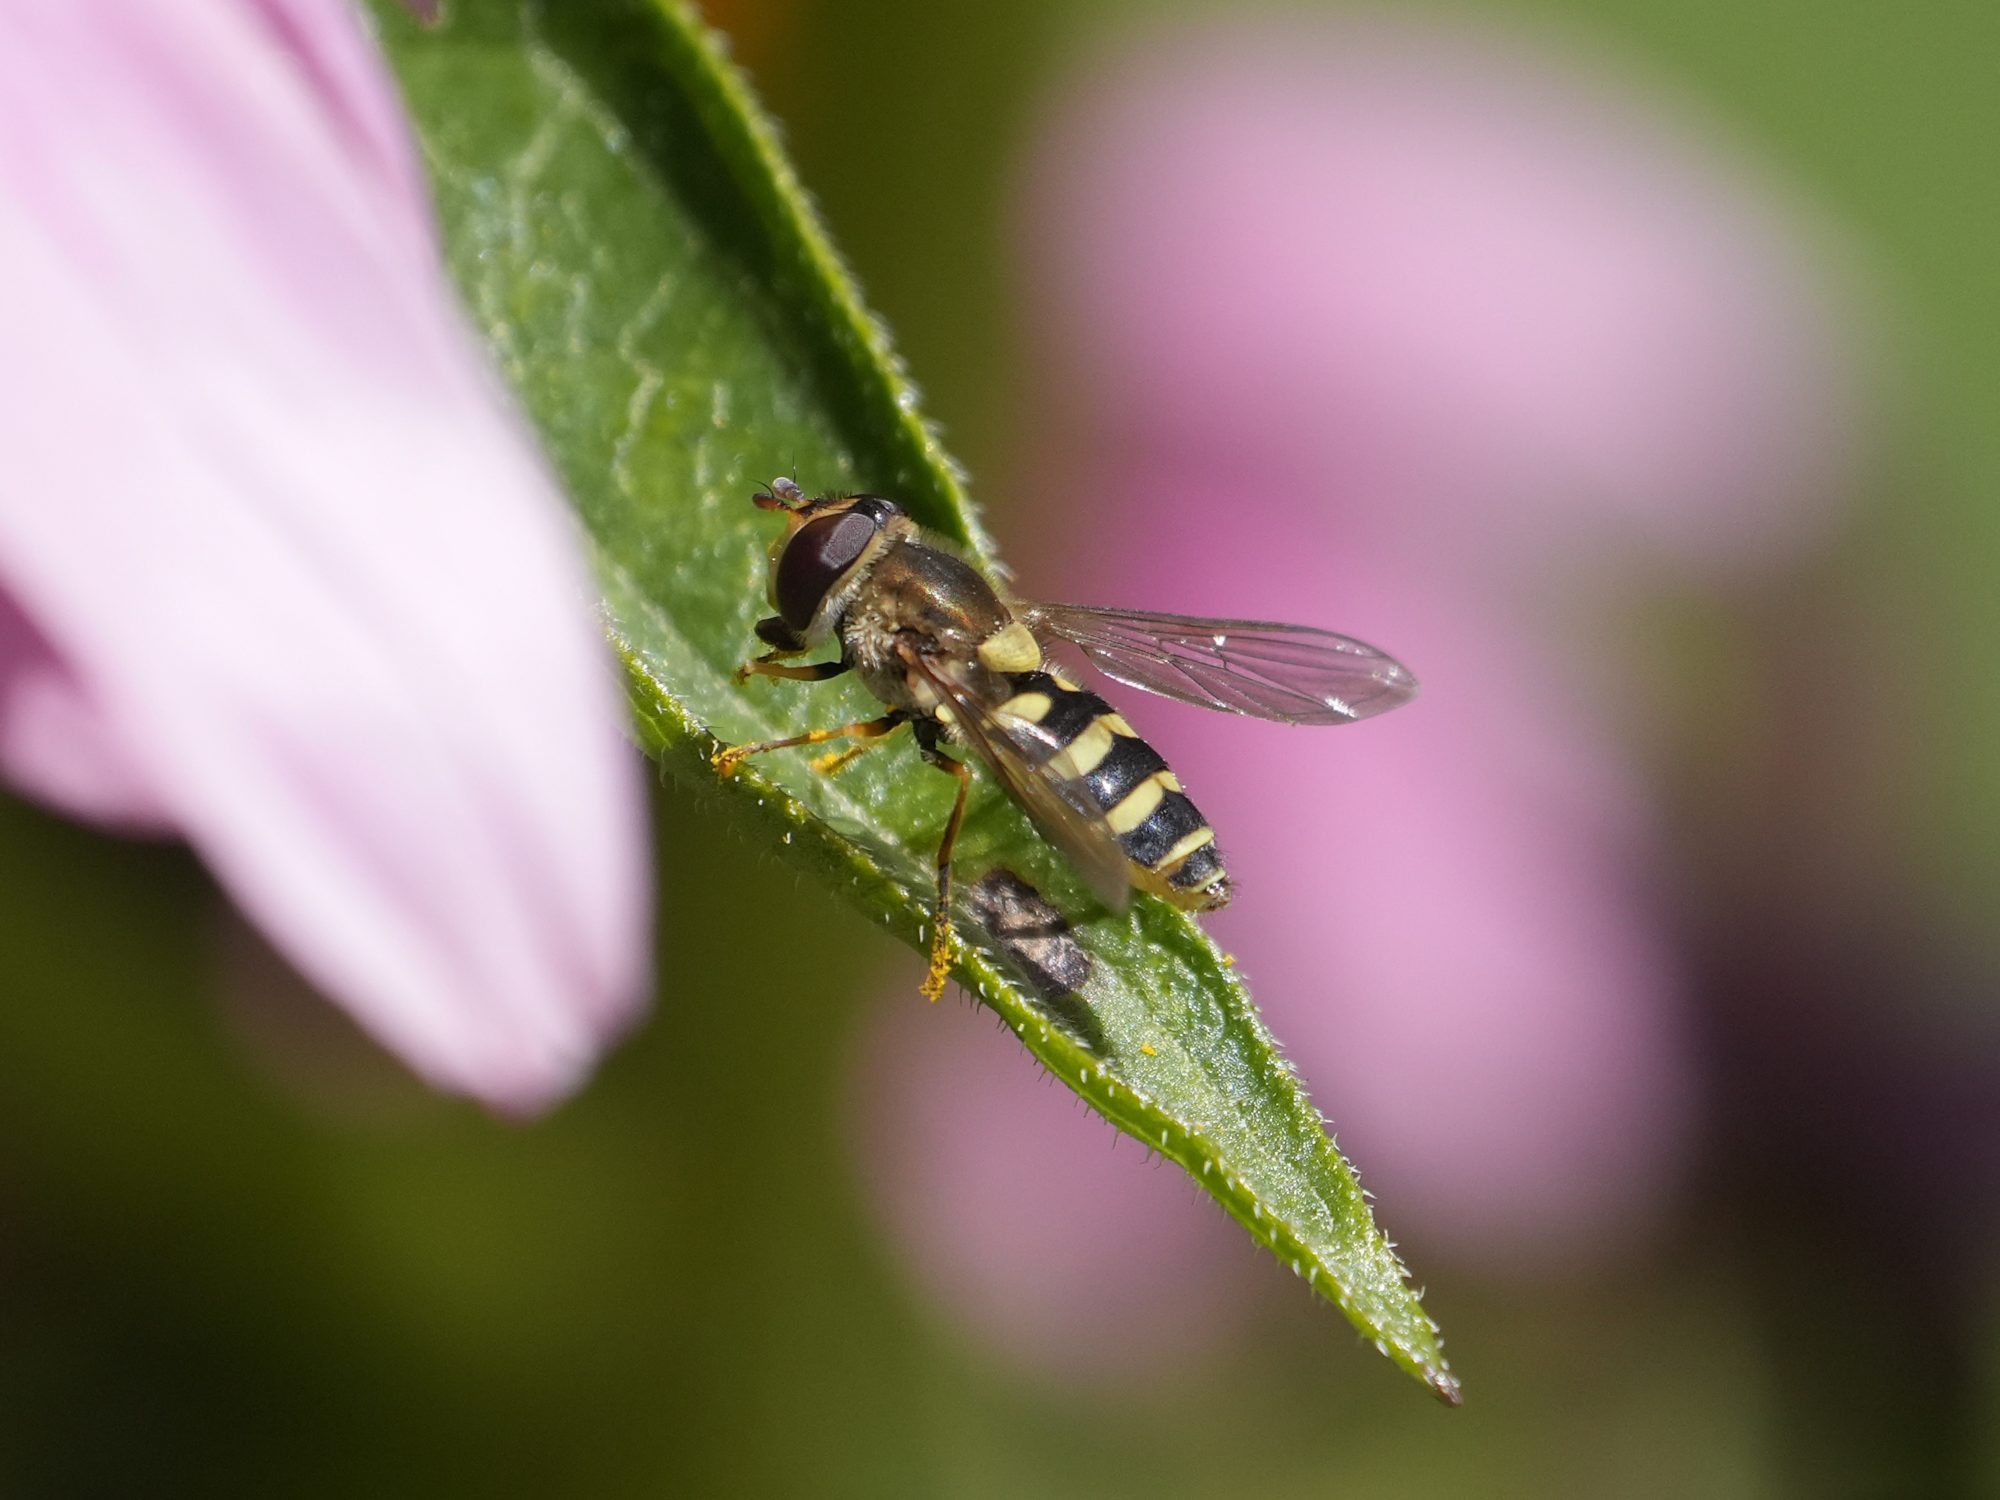 A slim yellow and black hoverfly is resting on a green leaf, with pink petals in the background